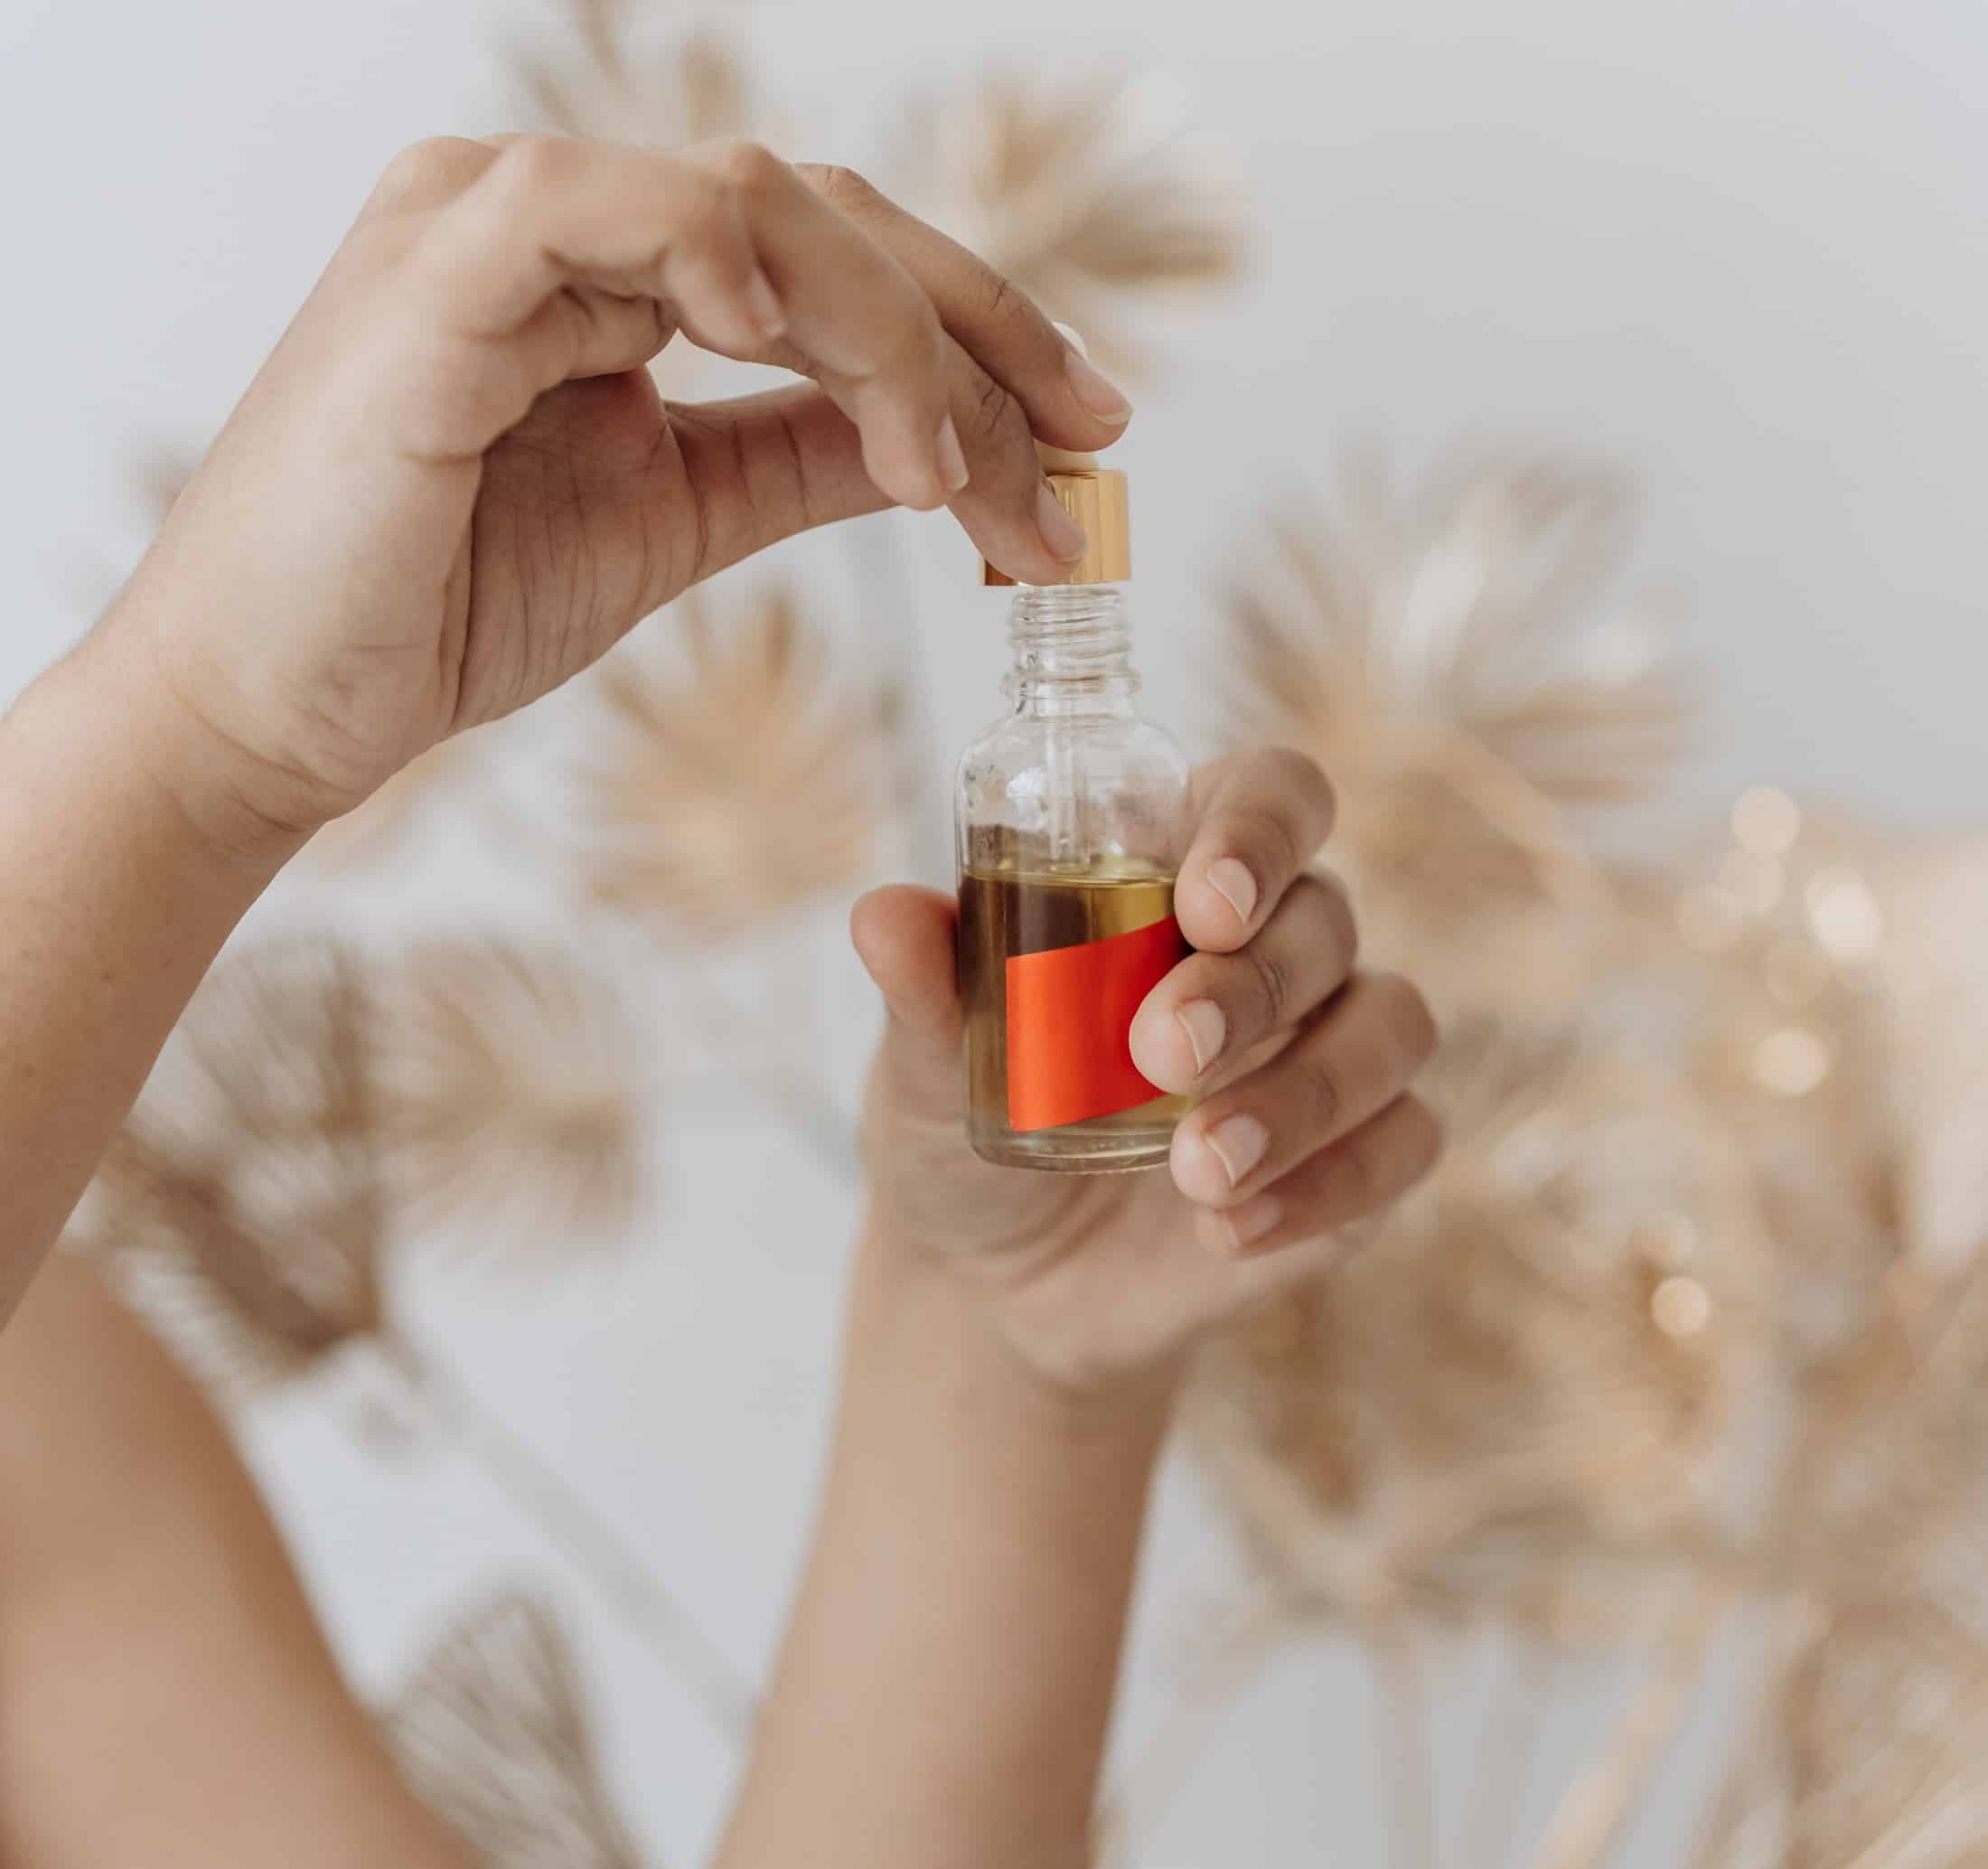 Here are some essential oils that are beneficial for your hair